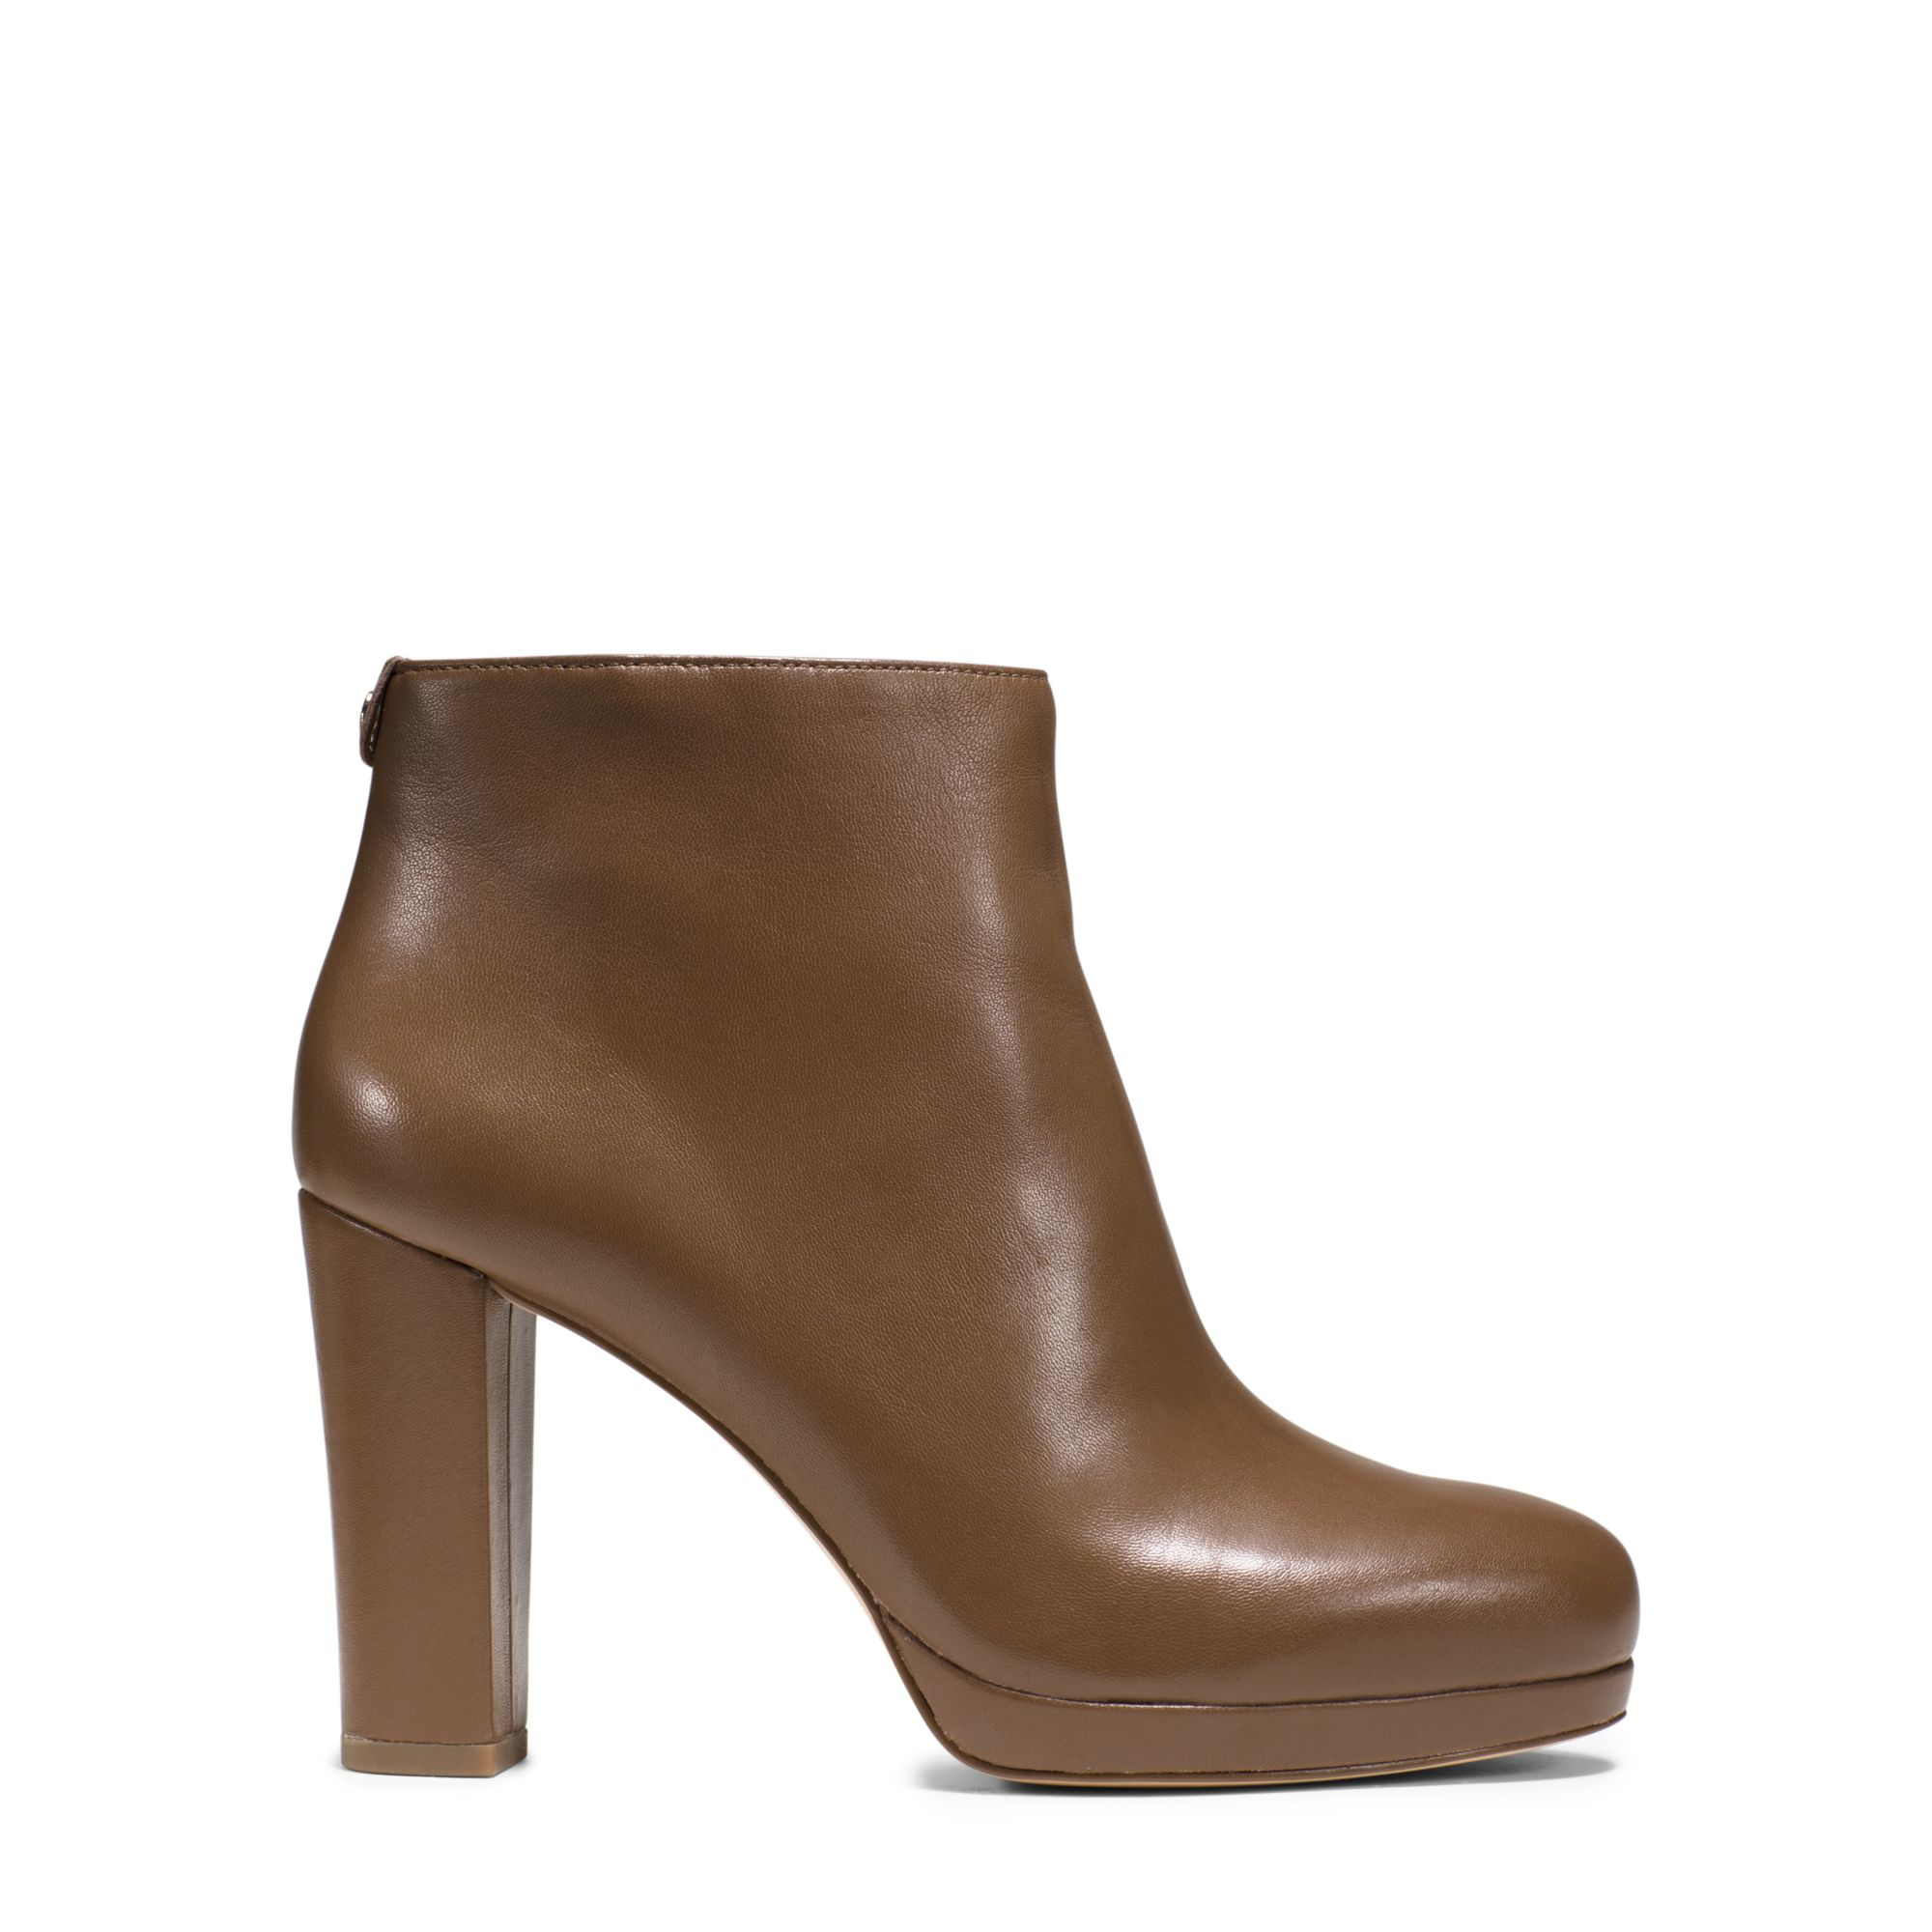 Lyst - Michael Kors Sammy Leather Platform Ankle Boot in Brown